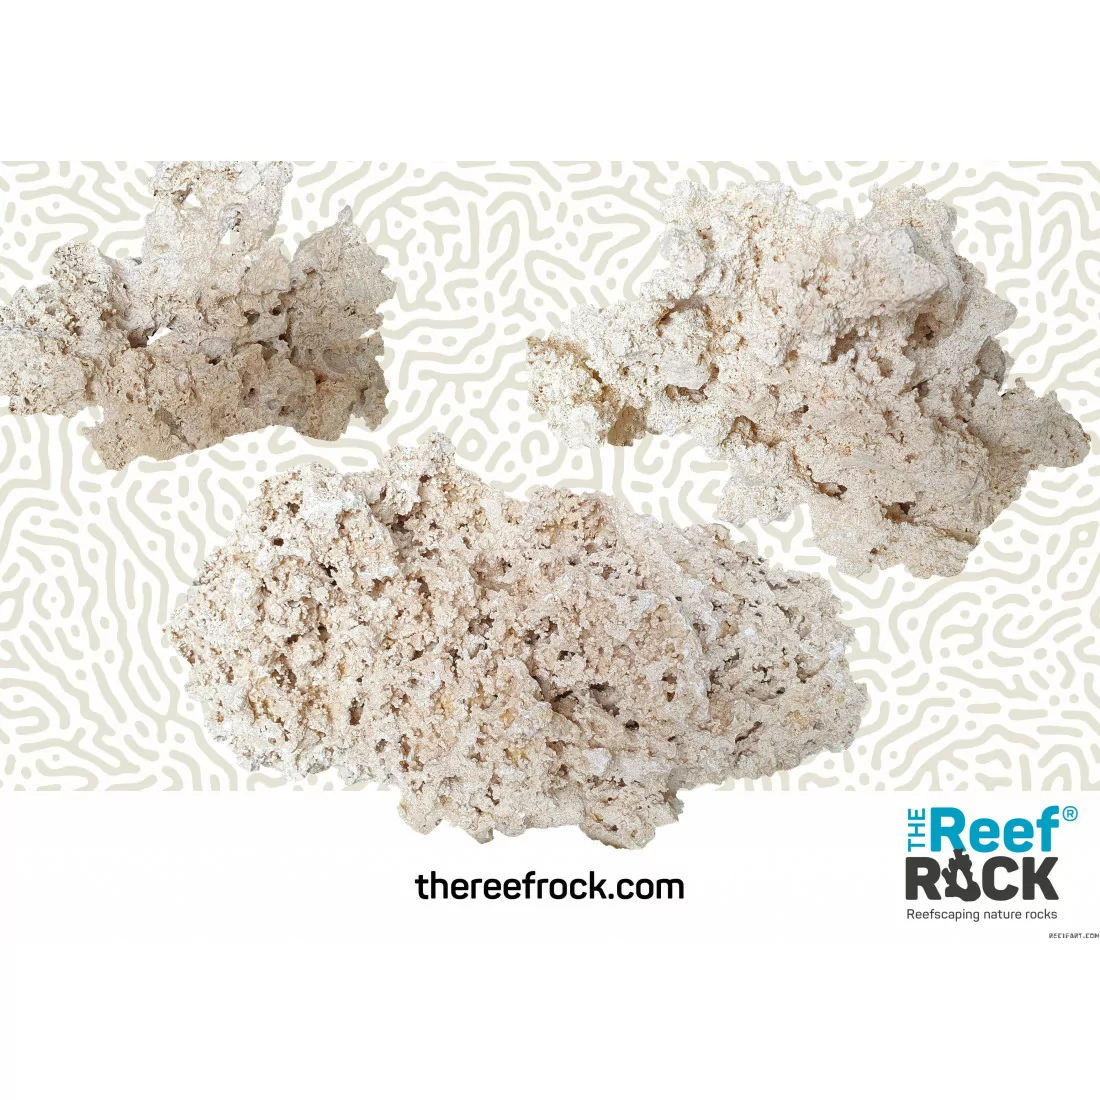 Natural rocks "The reef Rock" (20kg) - Size S